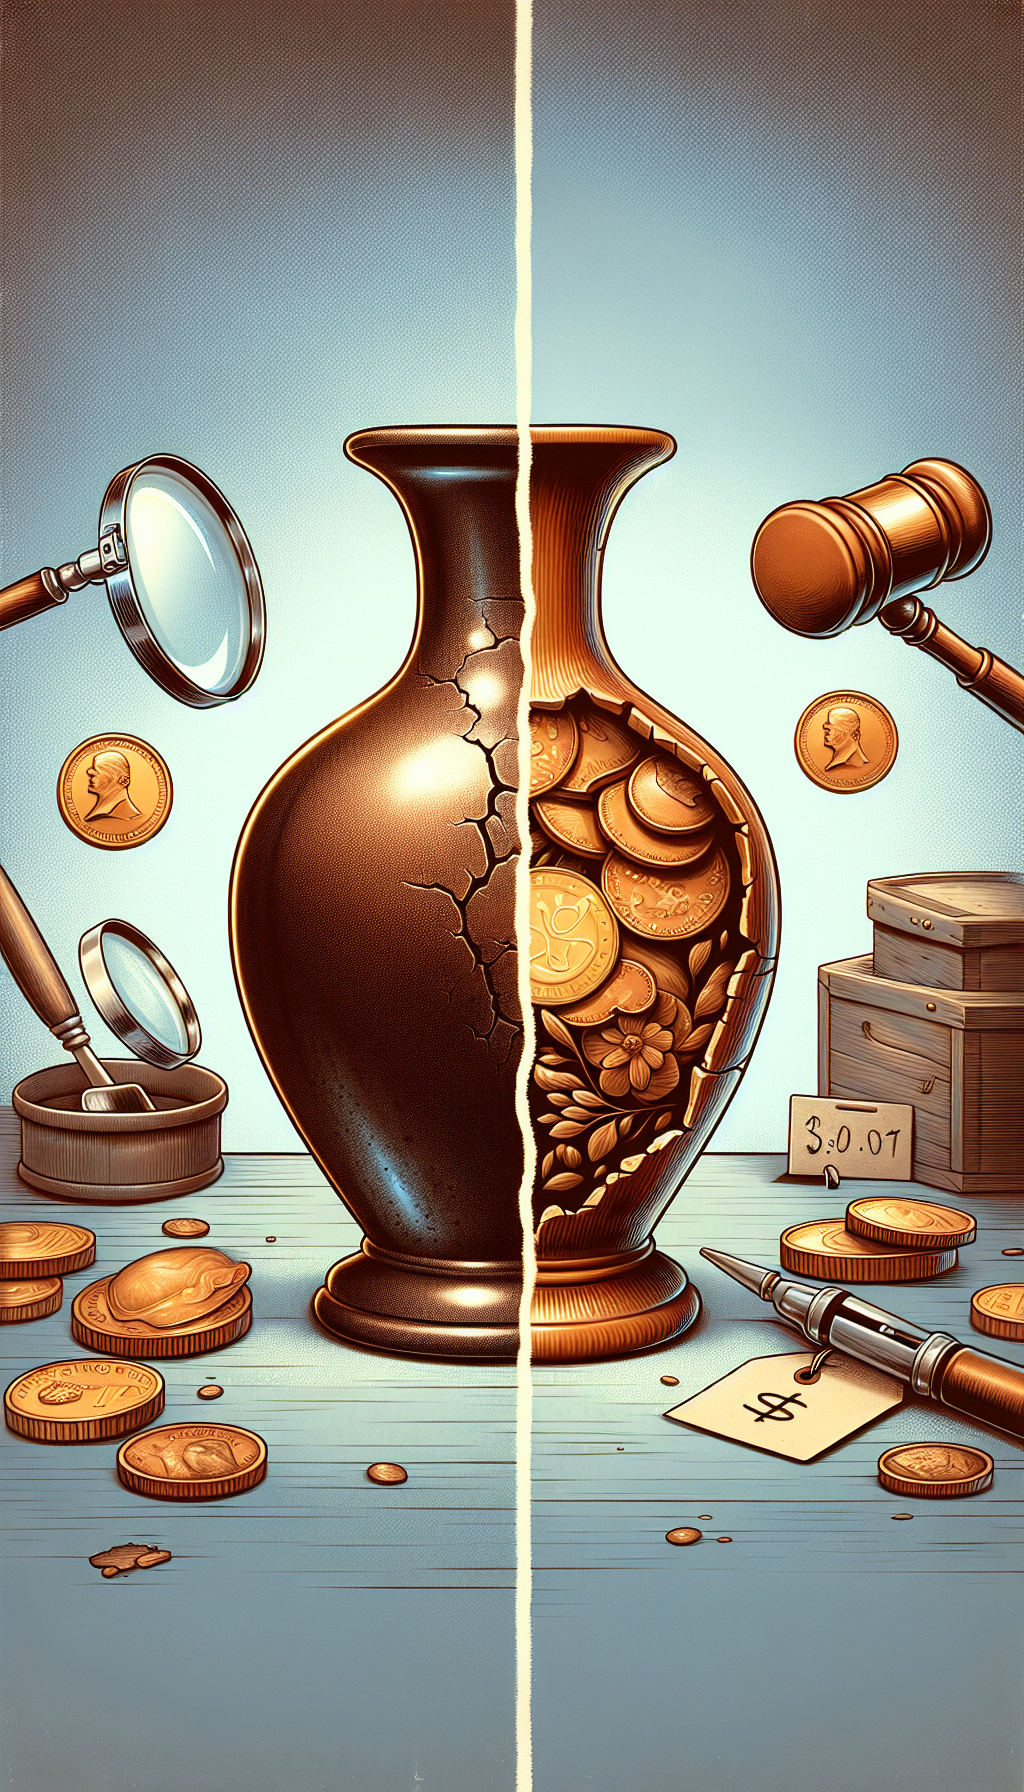 A split-frame illustration depicts a brown antique jug, one half pristine and the other featuring cracks and chips. Amidst a background of magnifying glasses, auctioneer hammers and price tags, with the pristine side boasting a shining gold coin, the damaged side fades to a dull copper penny, visually juxtaposing the jug's value against its condition.